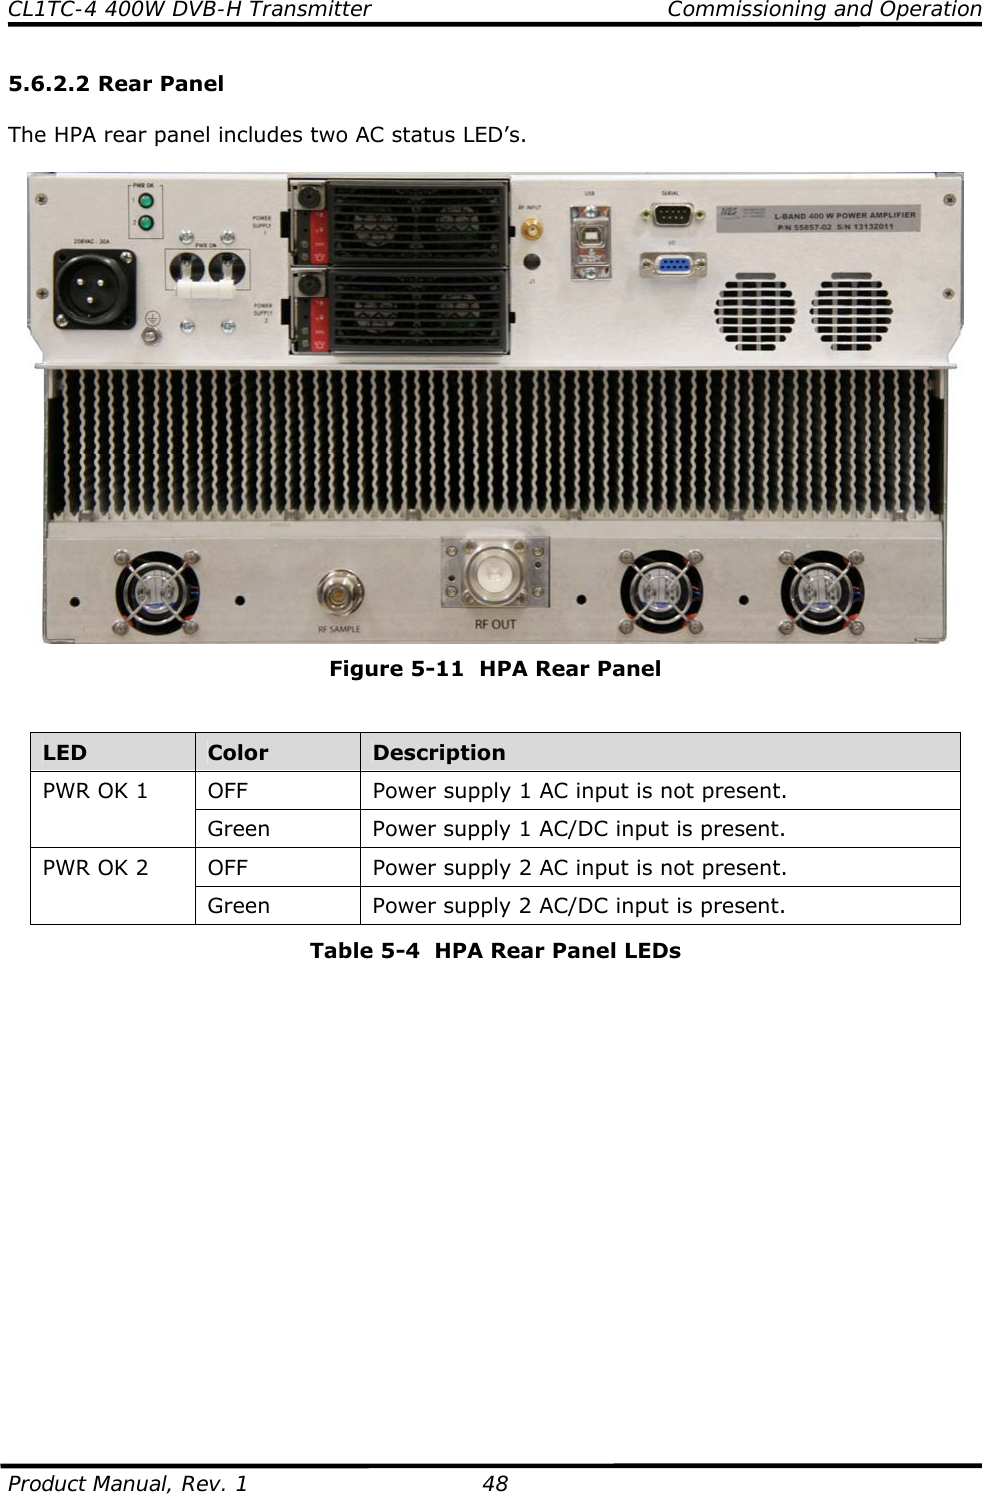 CL1TC-4 400W DVB-H Transmitter    Commissioning and Operation  Product Manual, Rev. 1  48 5.6.2.2 Rear Panel  The HPA rear panel includes two AC status LED’s.   Figure 5-11  HPA Rear Panel   LED  Color  Description OFF  Power supply 1 AC input is not present. PWR OK 1 Green  Power supply 1 AC/DC input is present. OFF  Power supply 2 AC input is not present. PWR OK 2 Green  Power supply 2 AC/DC input is present. Table 5-4  HPA Rear Panel LEDs      